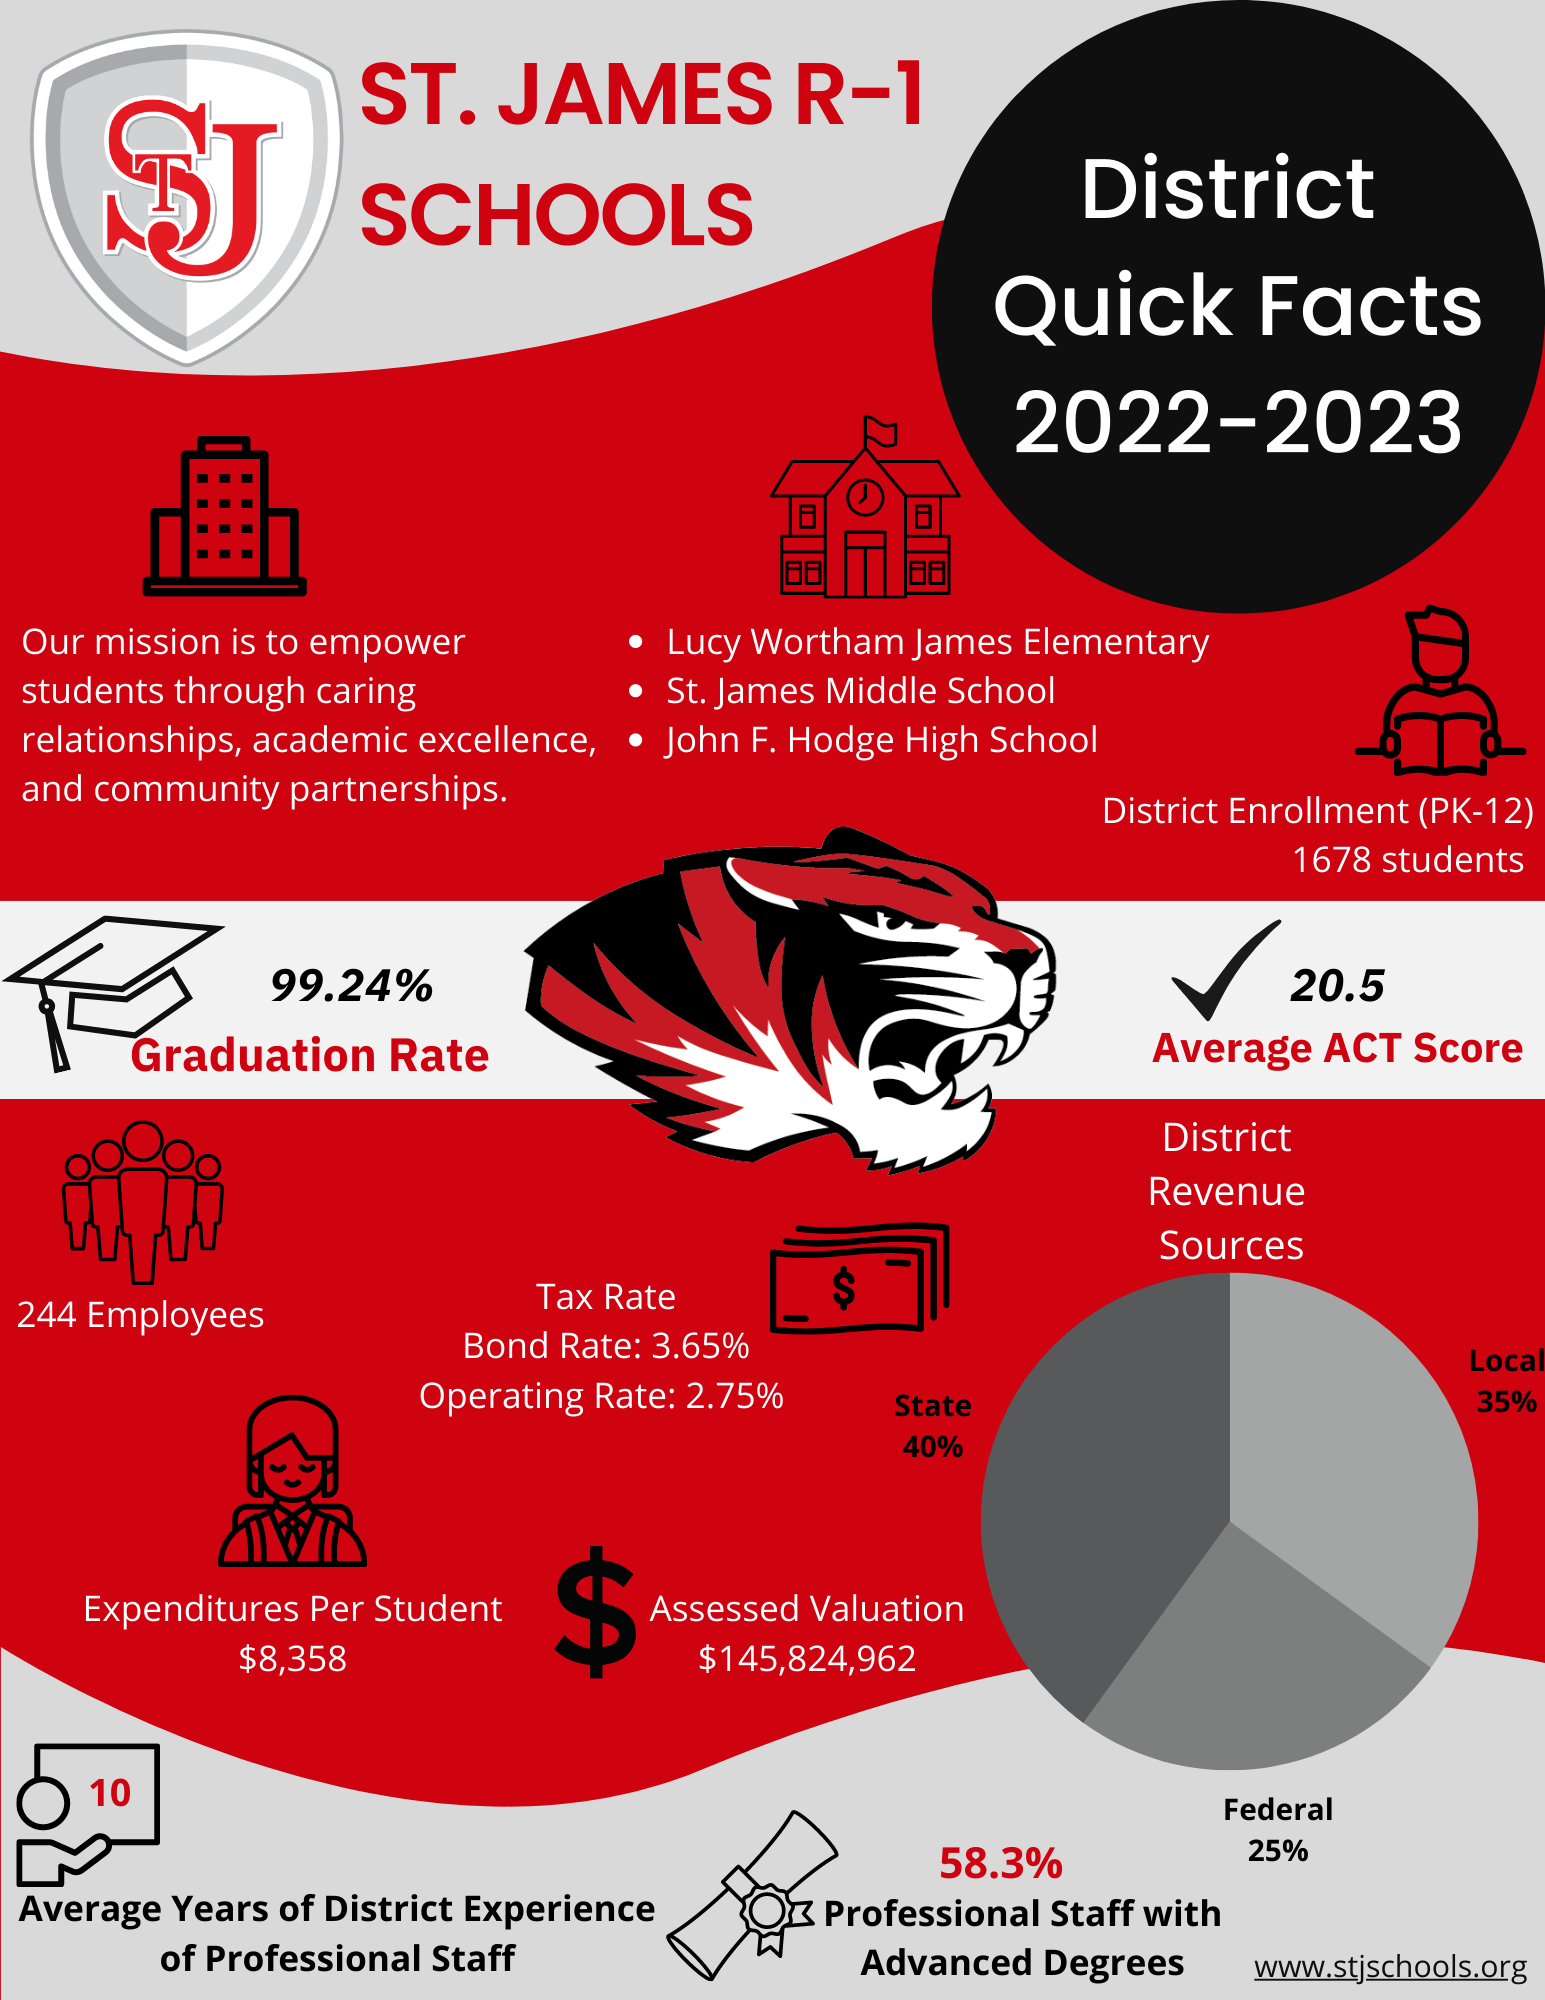 District Quick Facts